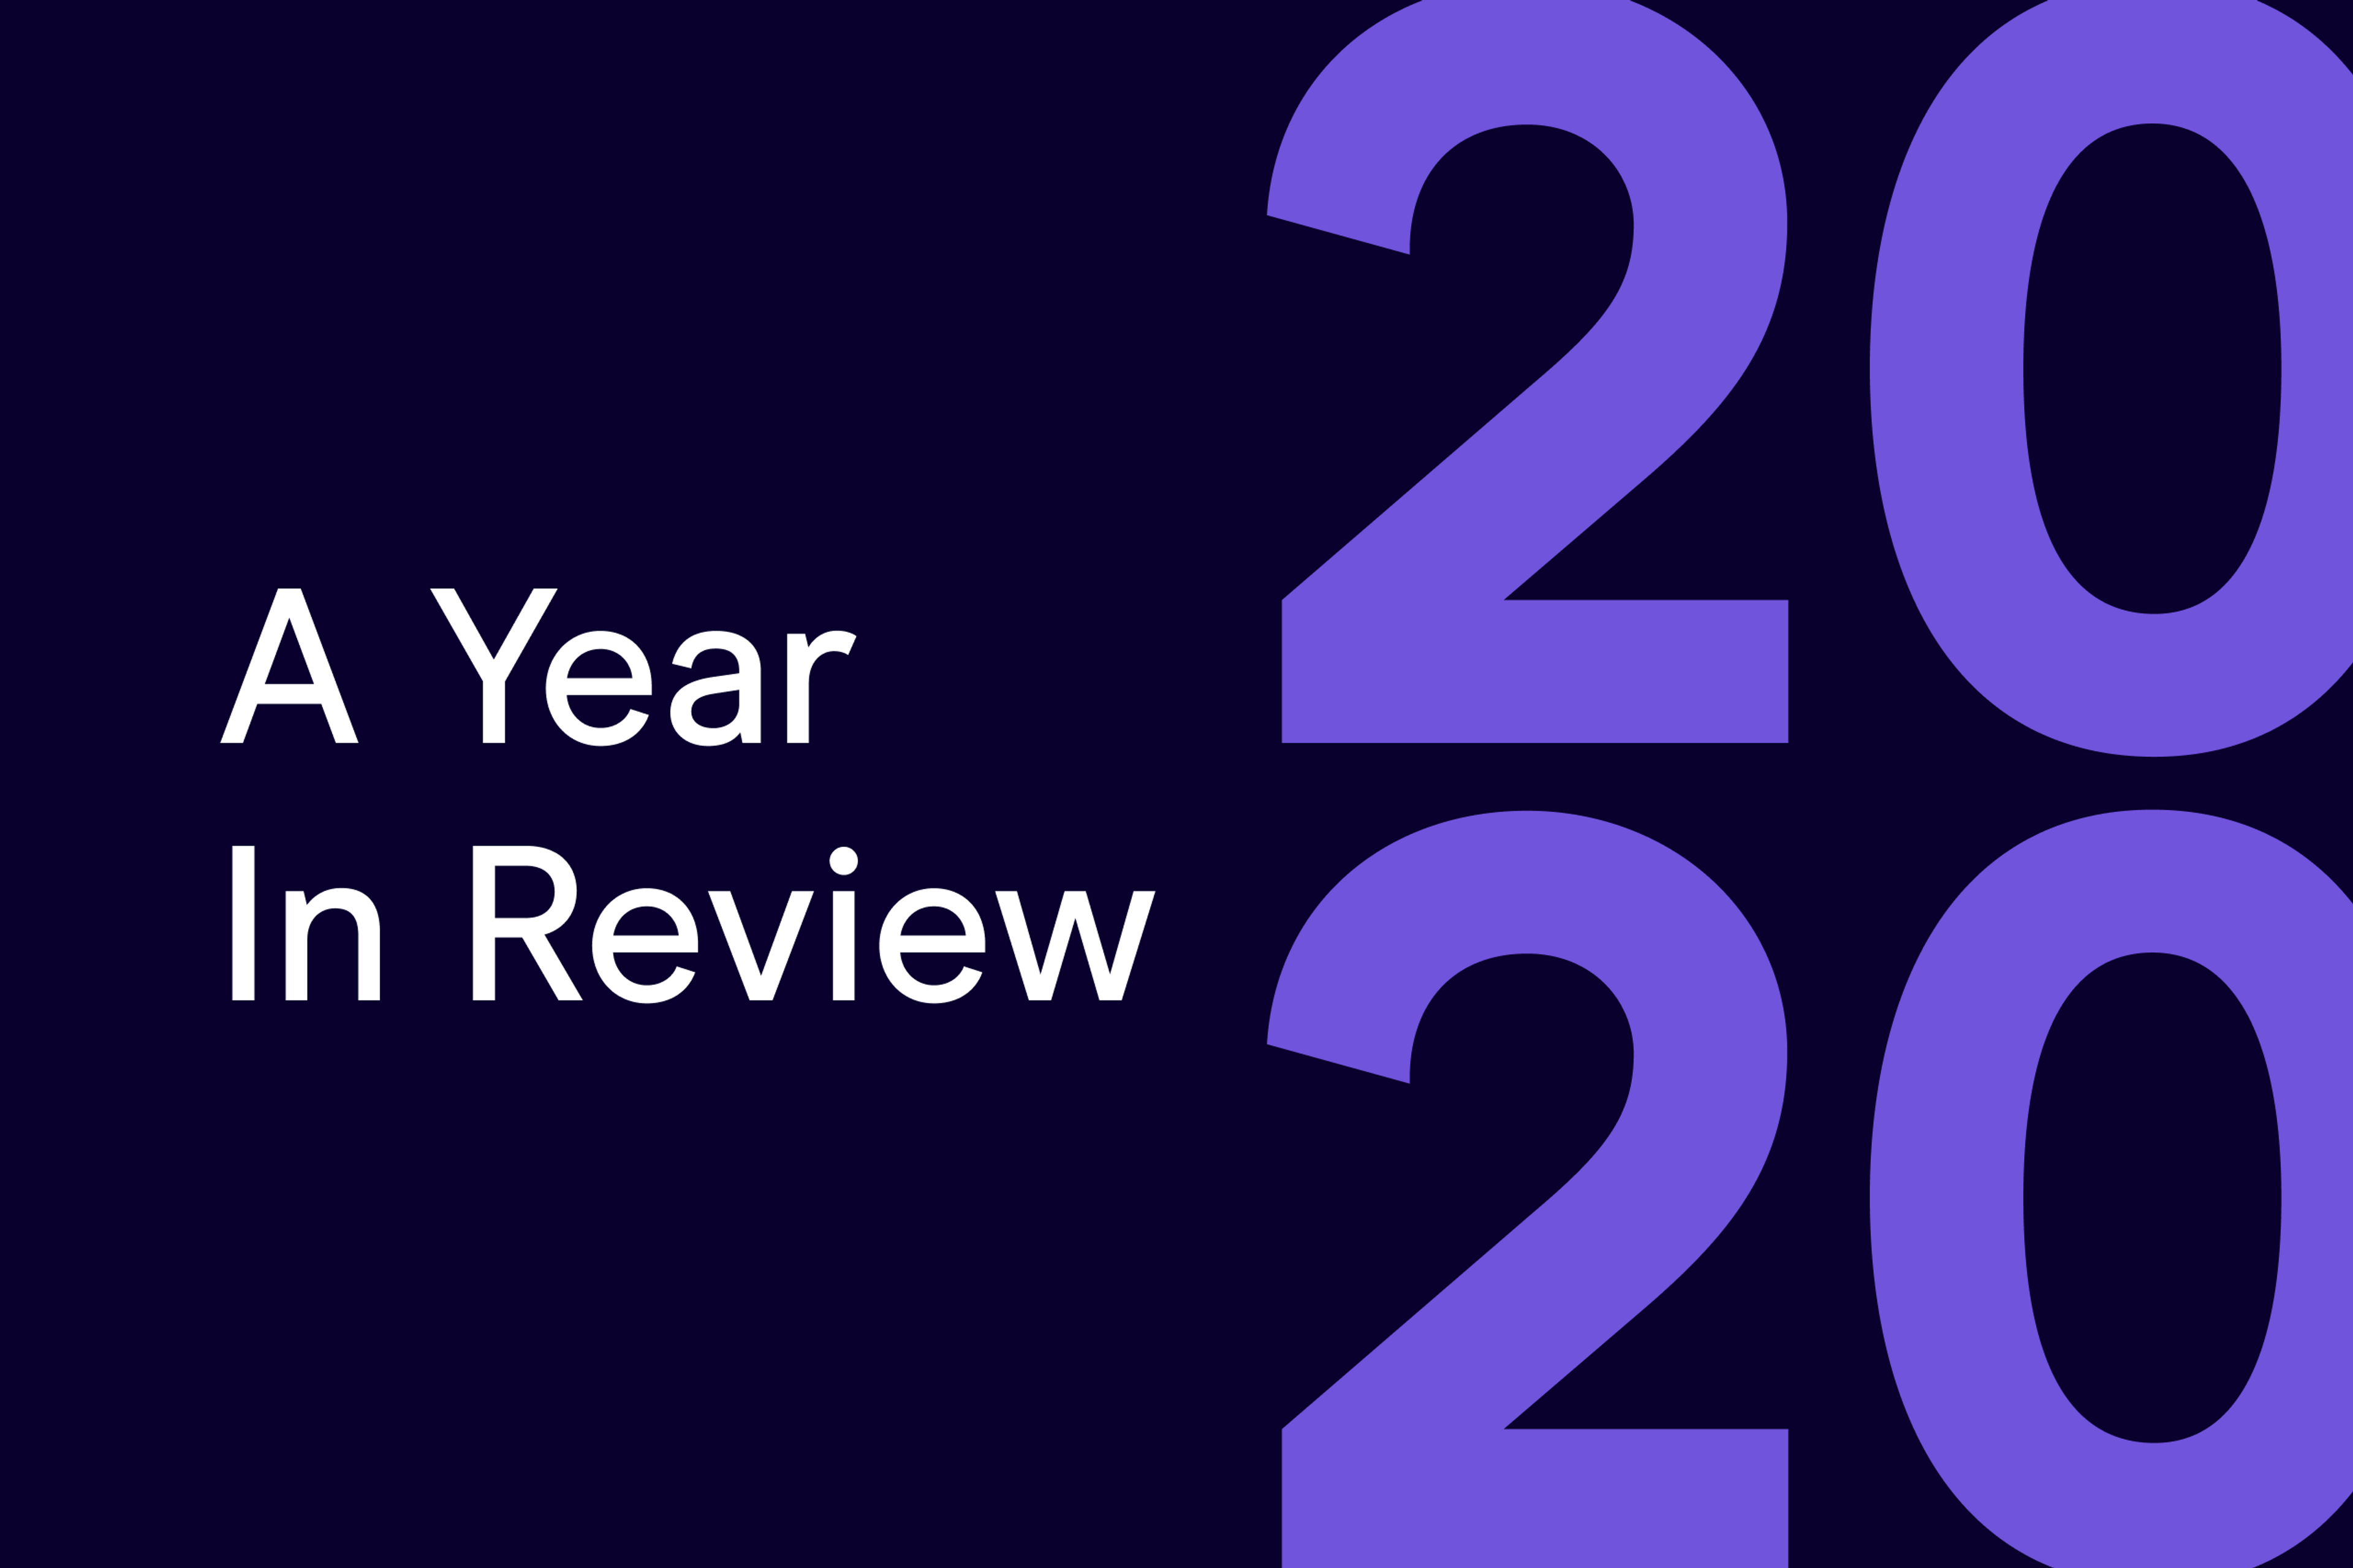 Zego 2020: a year in review